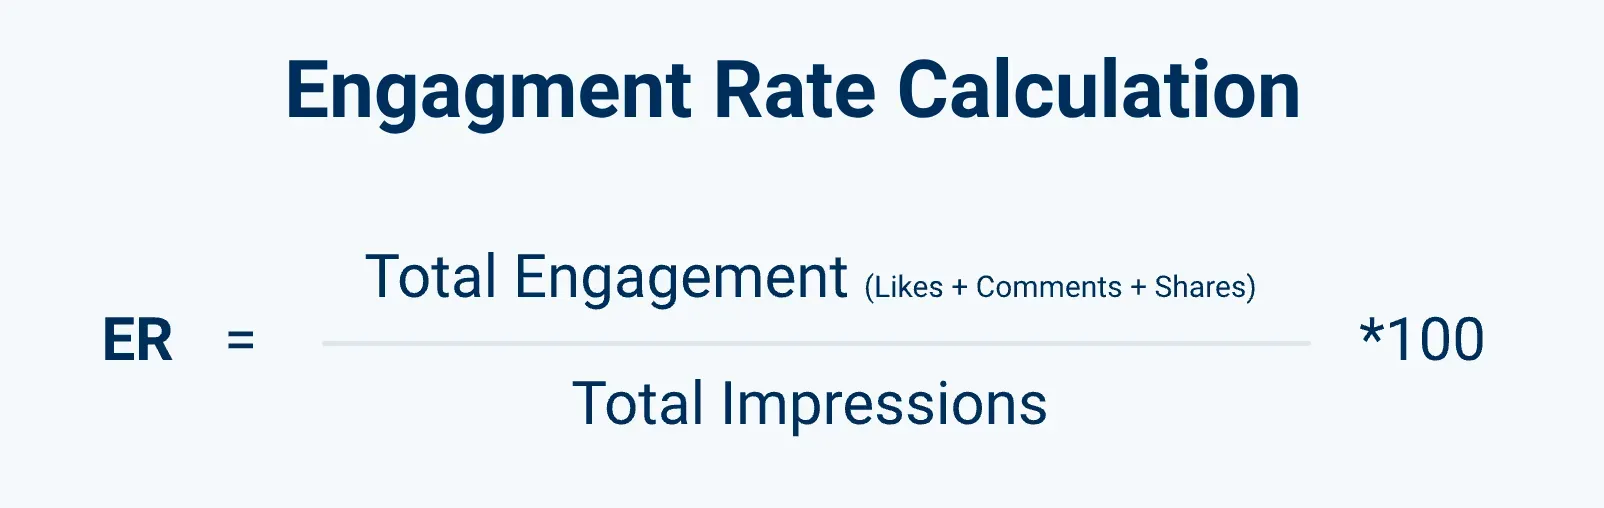 Calculating Engagement Rate